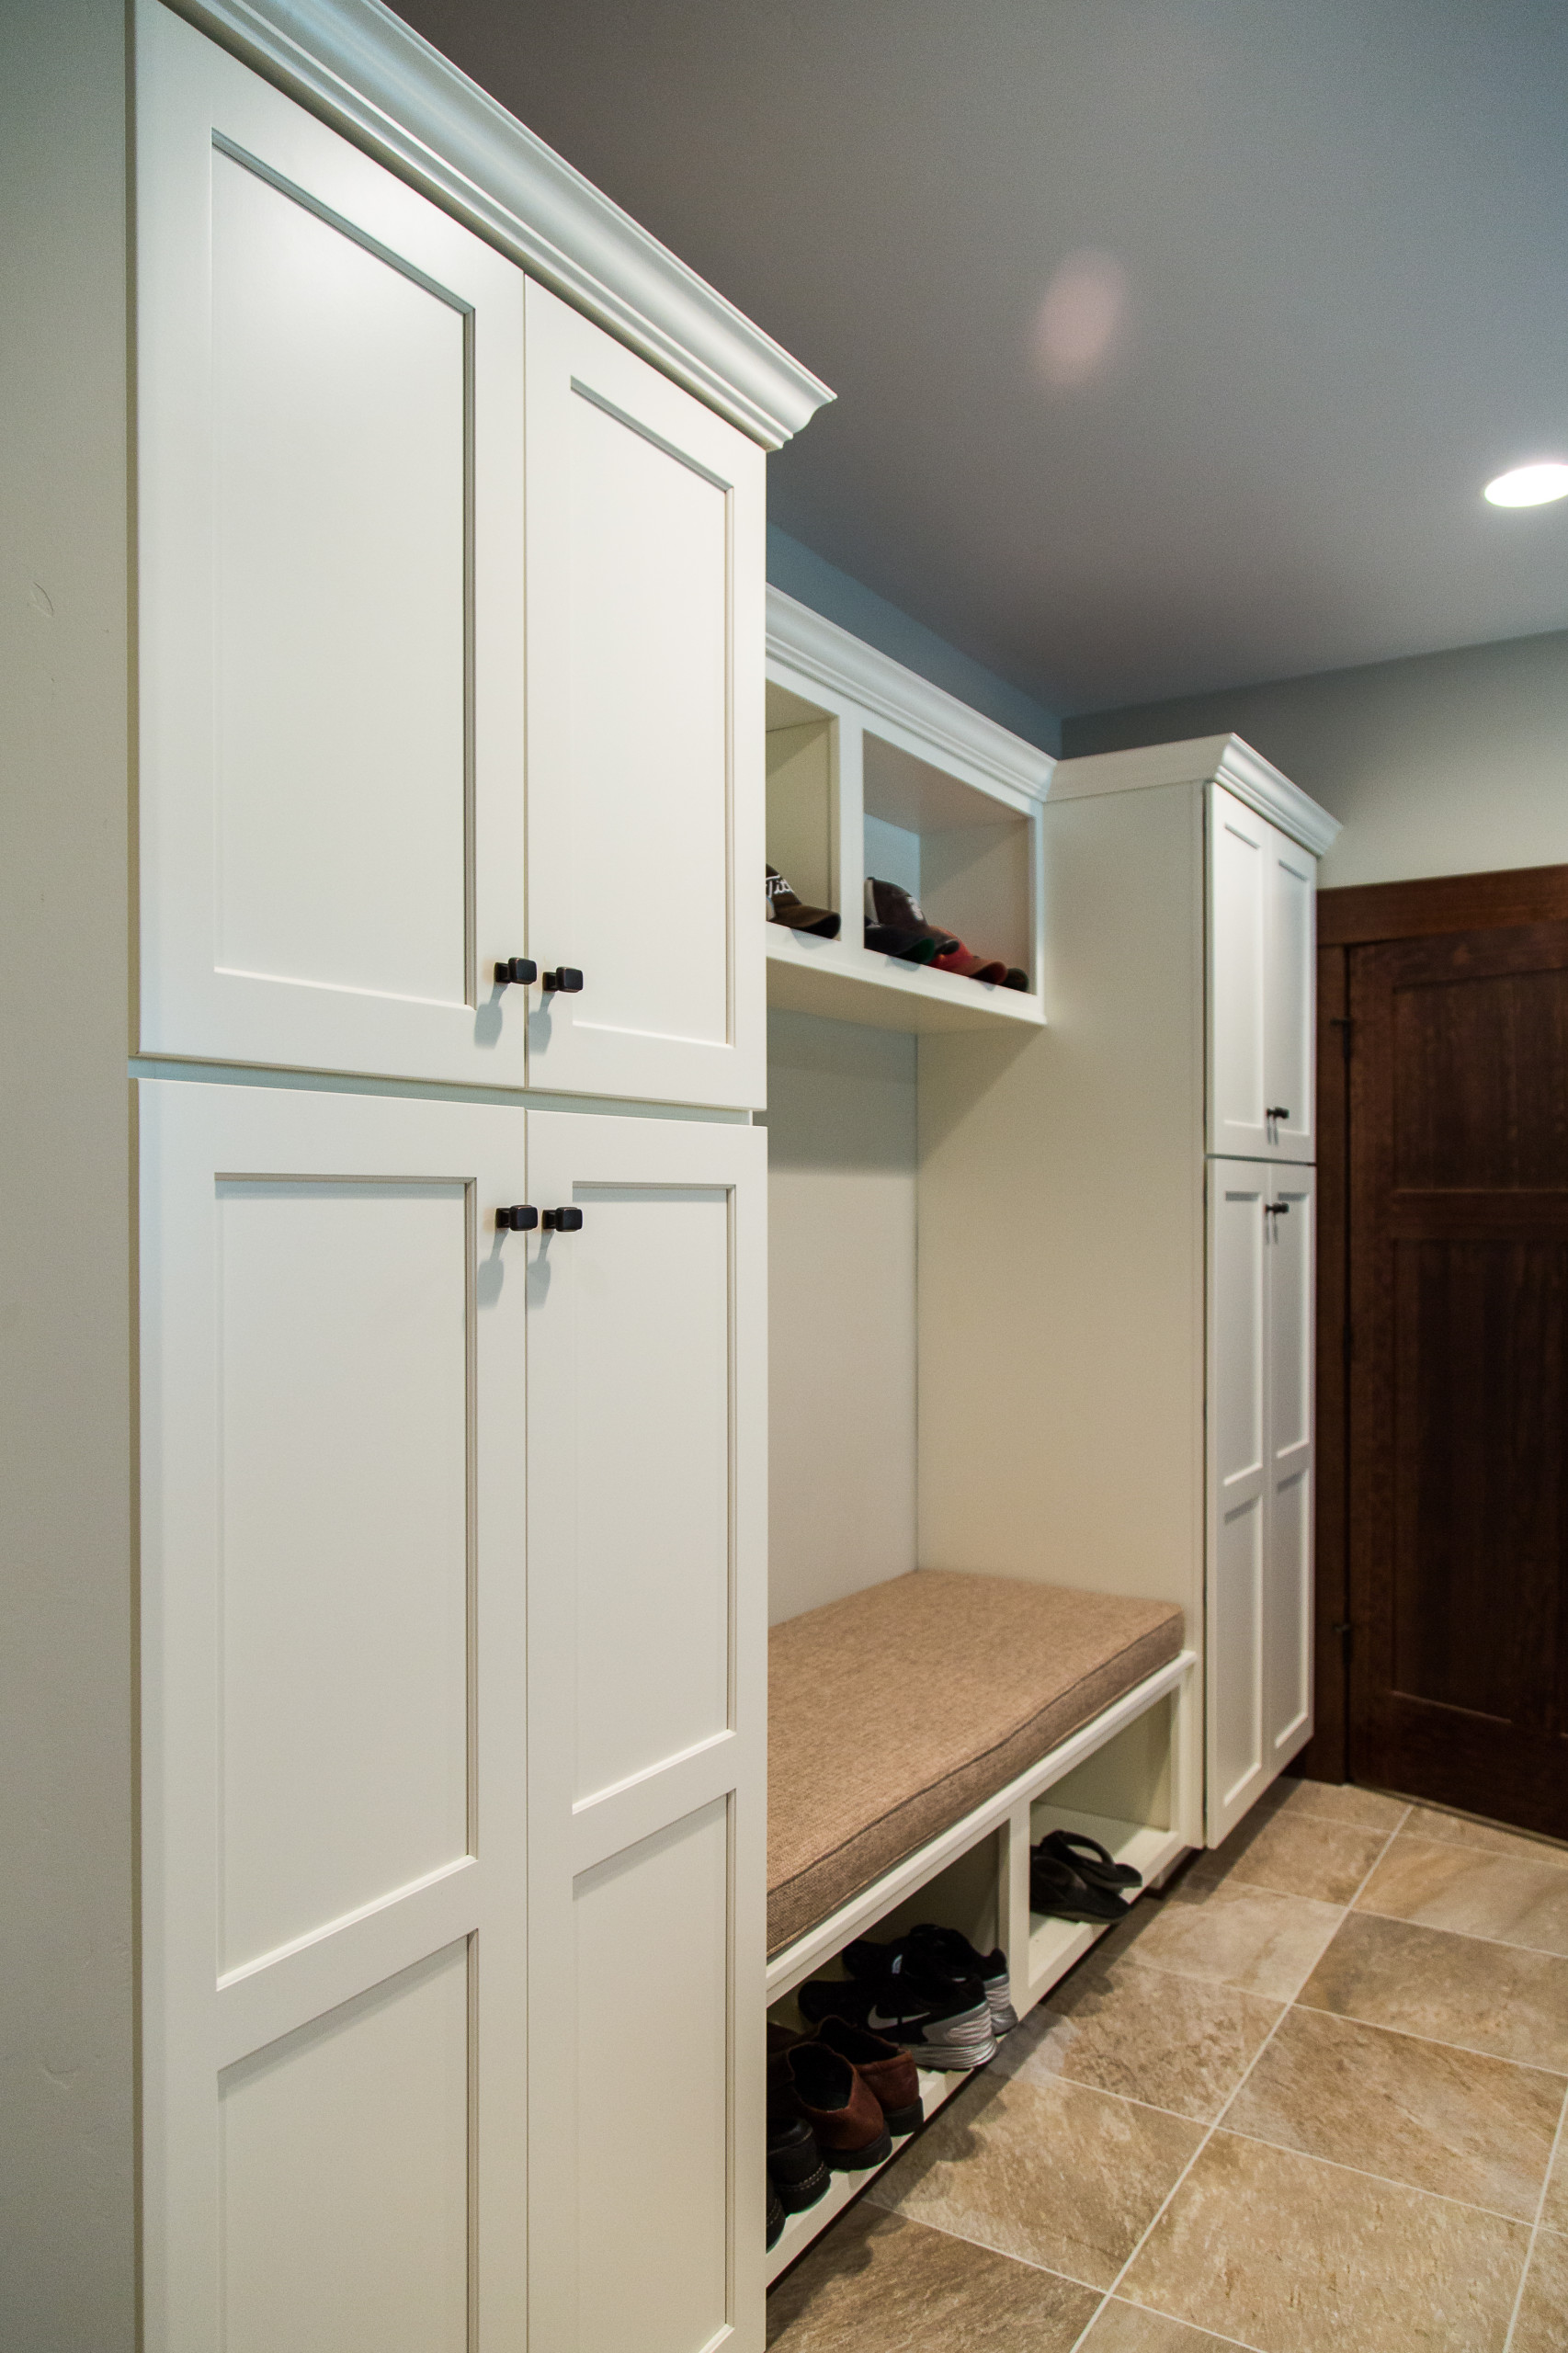 Laundry & Mudroom combine for the Ultimate in Utility